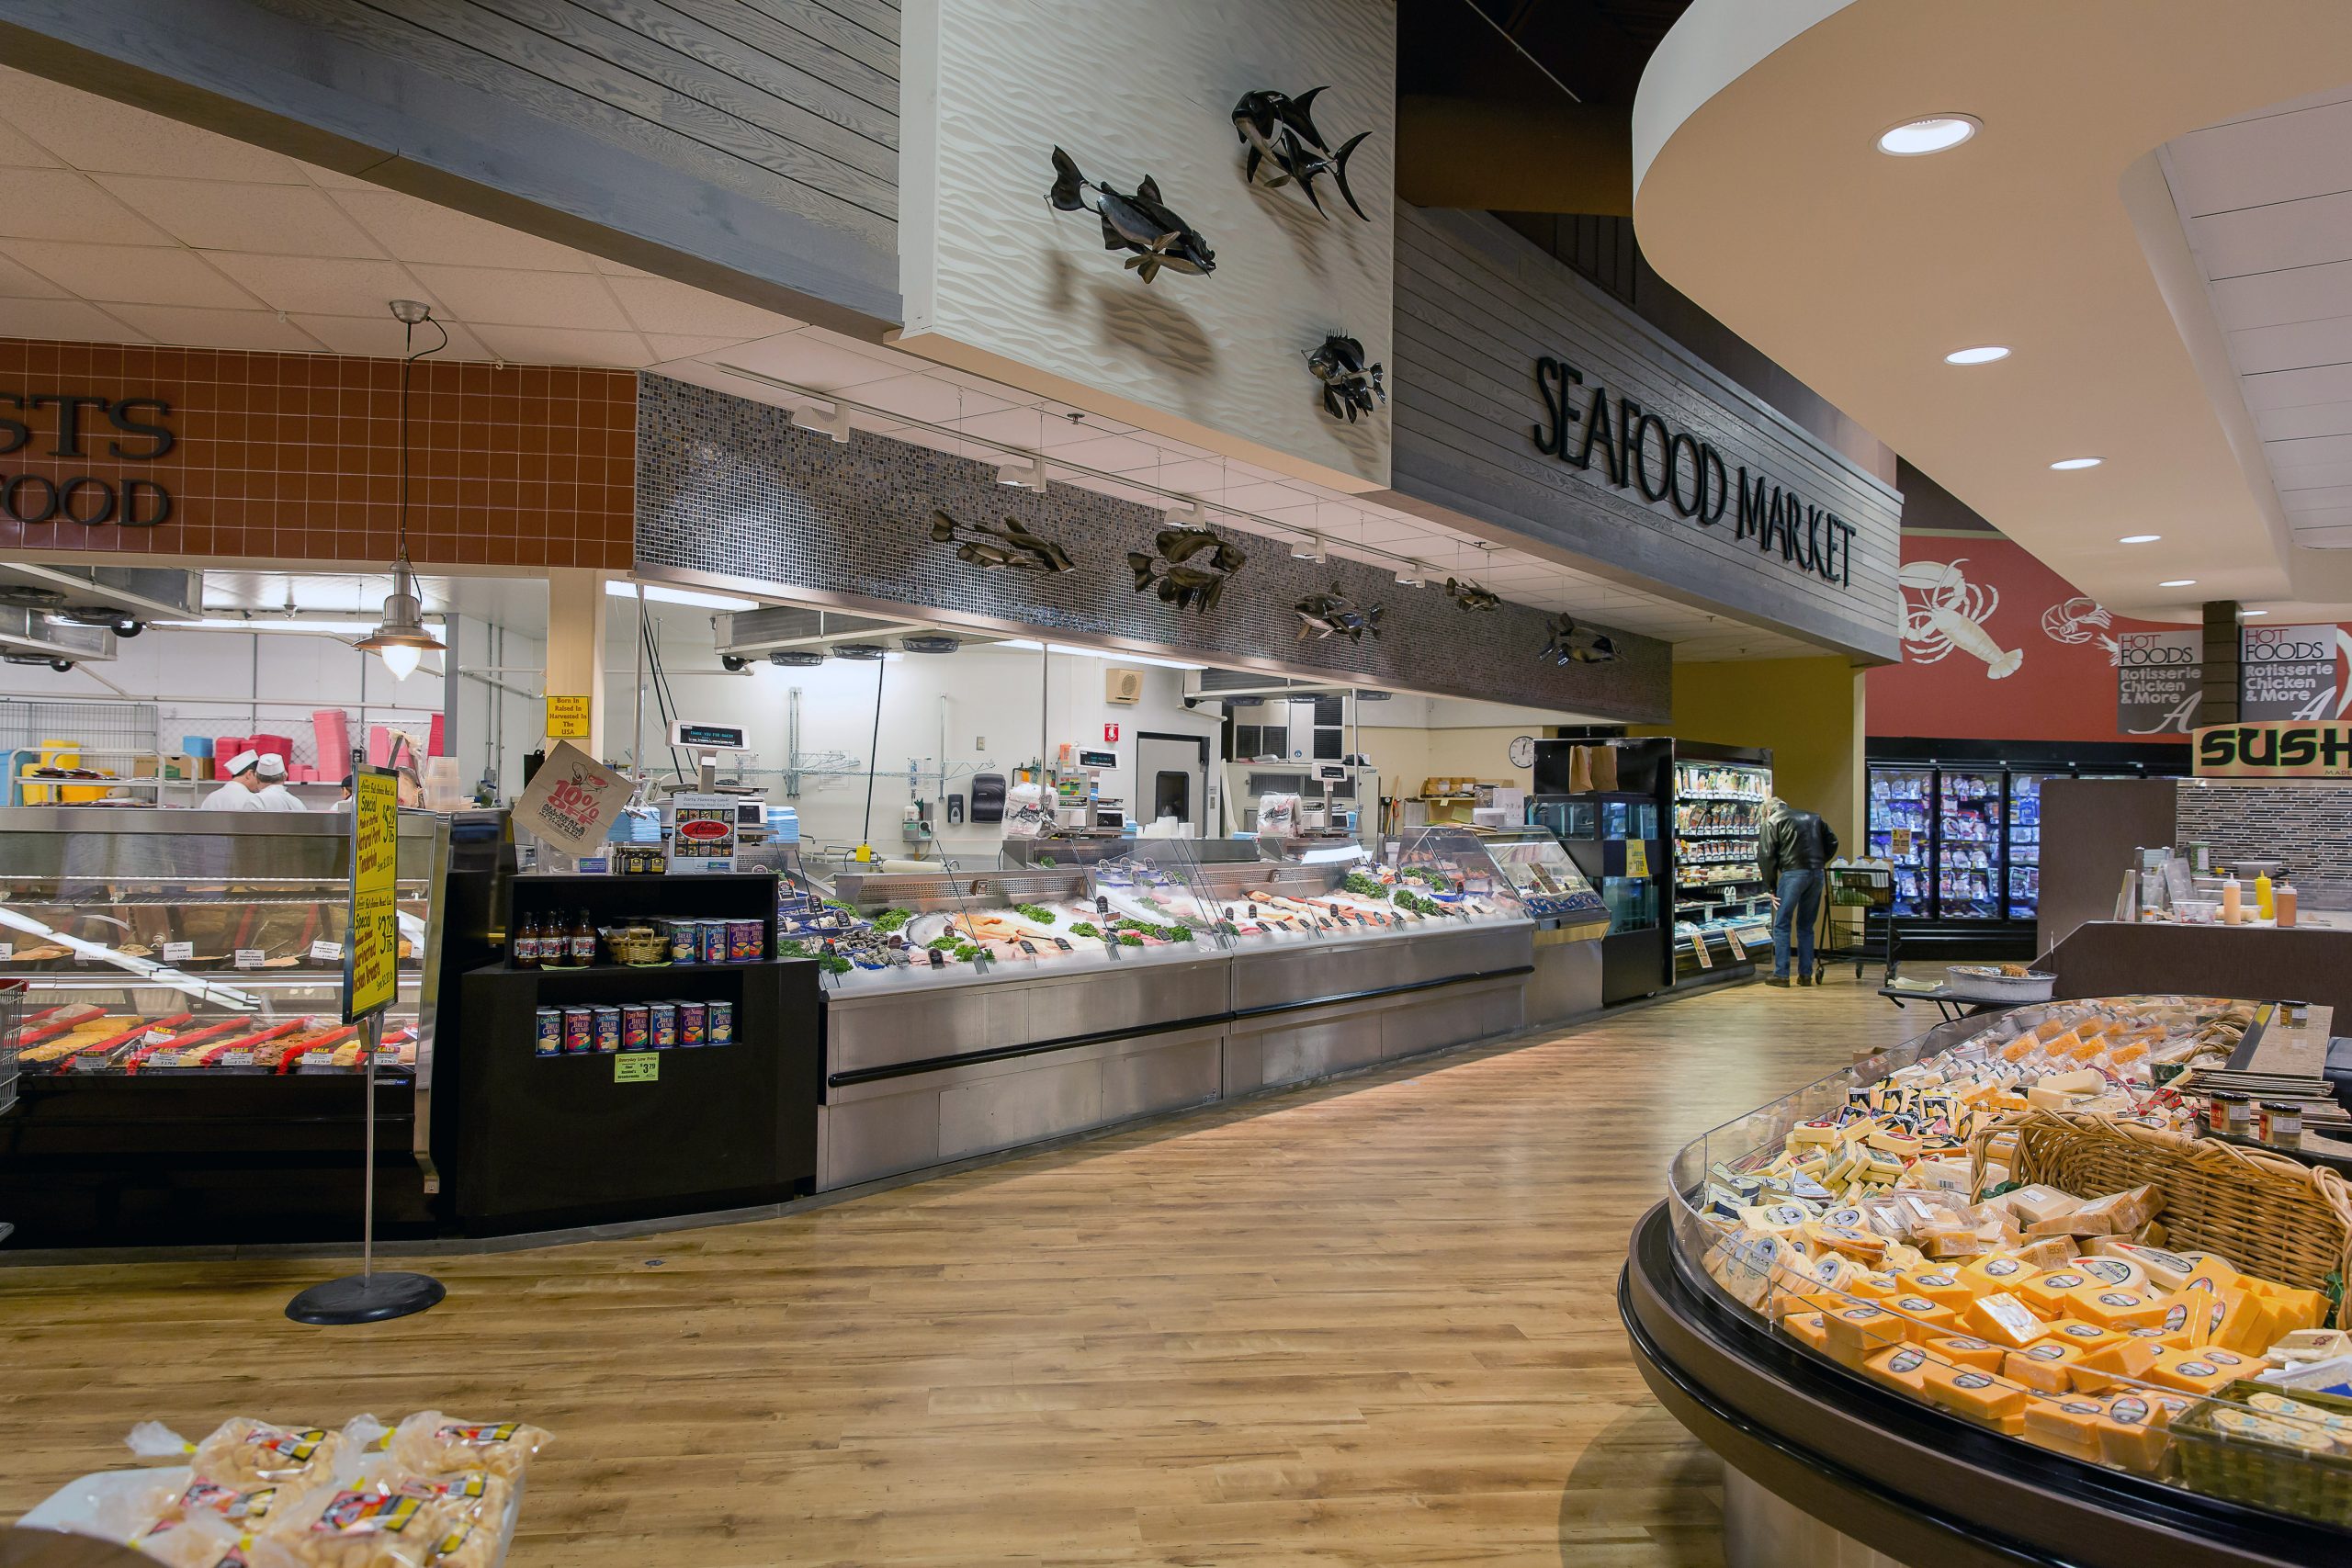 Meat, Seafood and Dairy were all enhanced through StoreMasters modern case choices and finishes